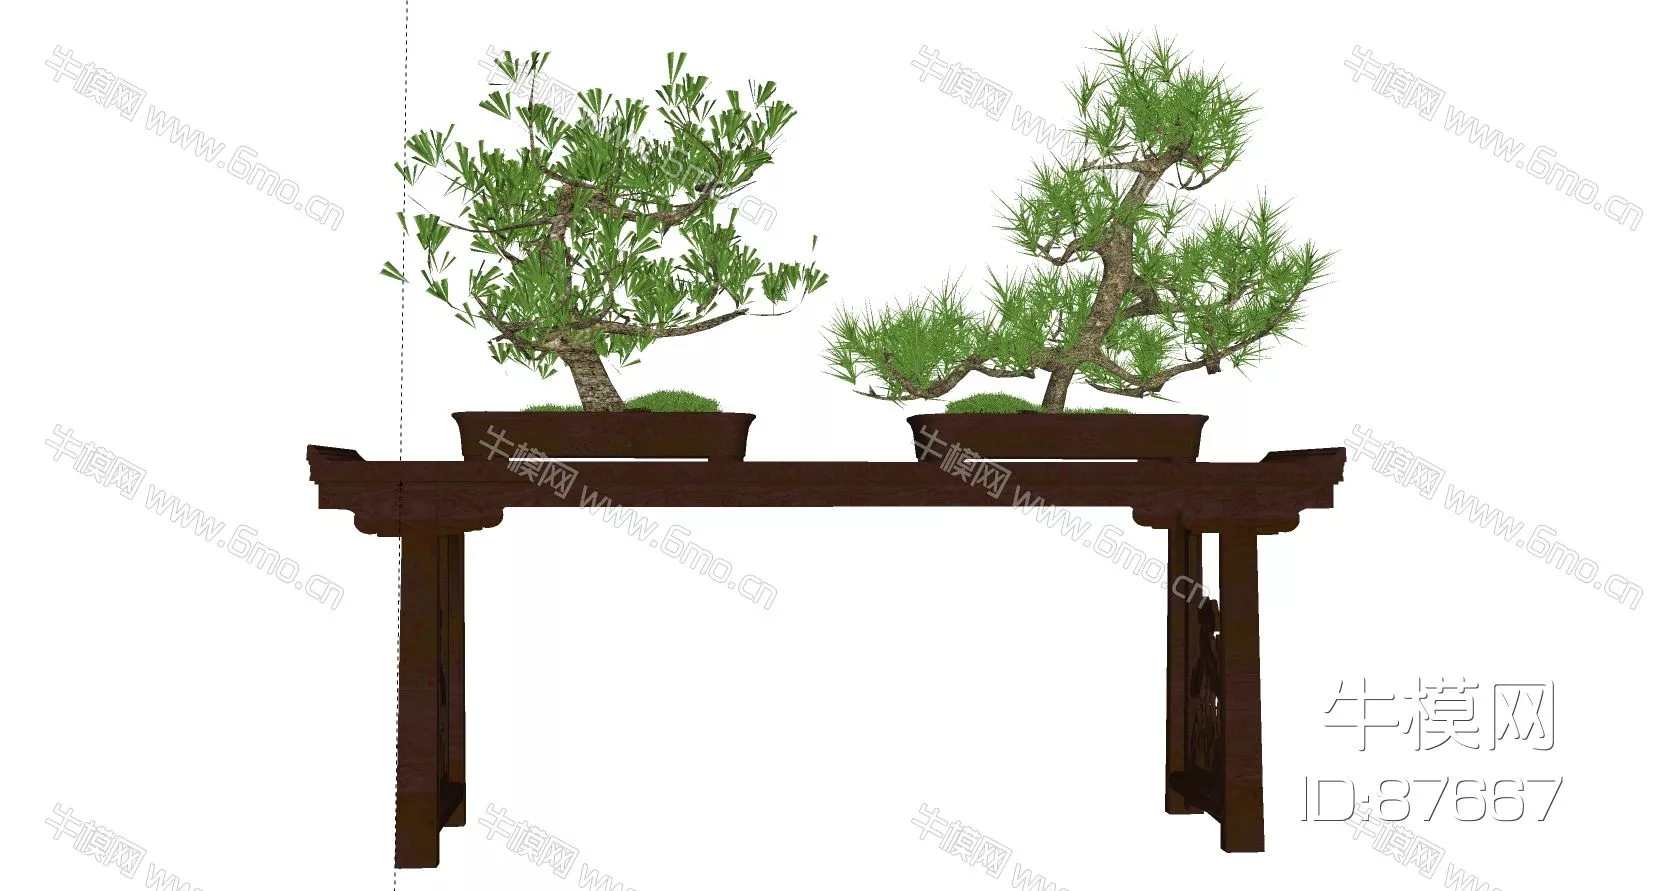 CHINESE POTTED PLANT - SKETCHUP 3D MODEL - ENSCAPE - 87667